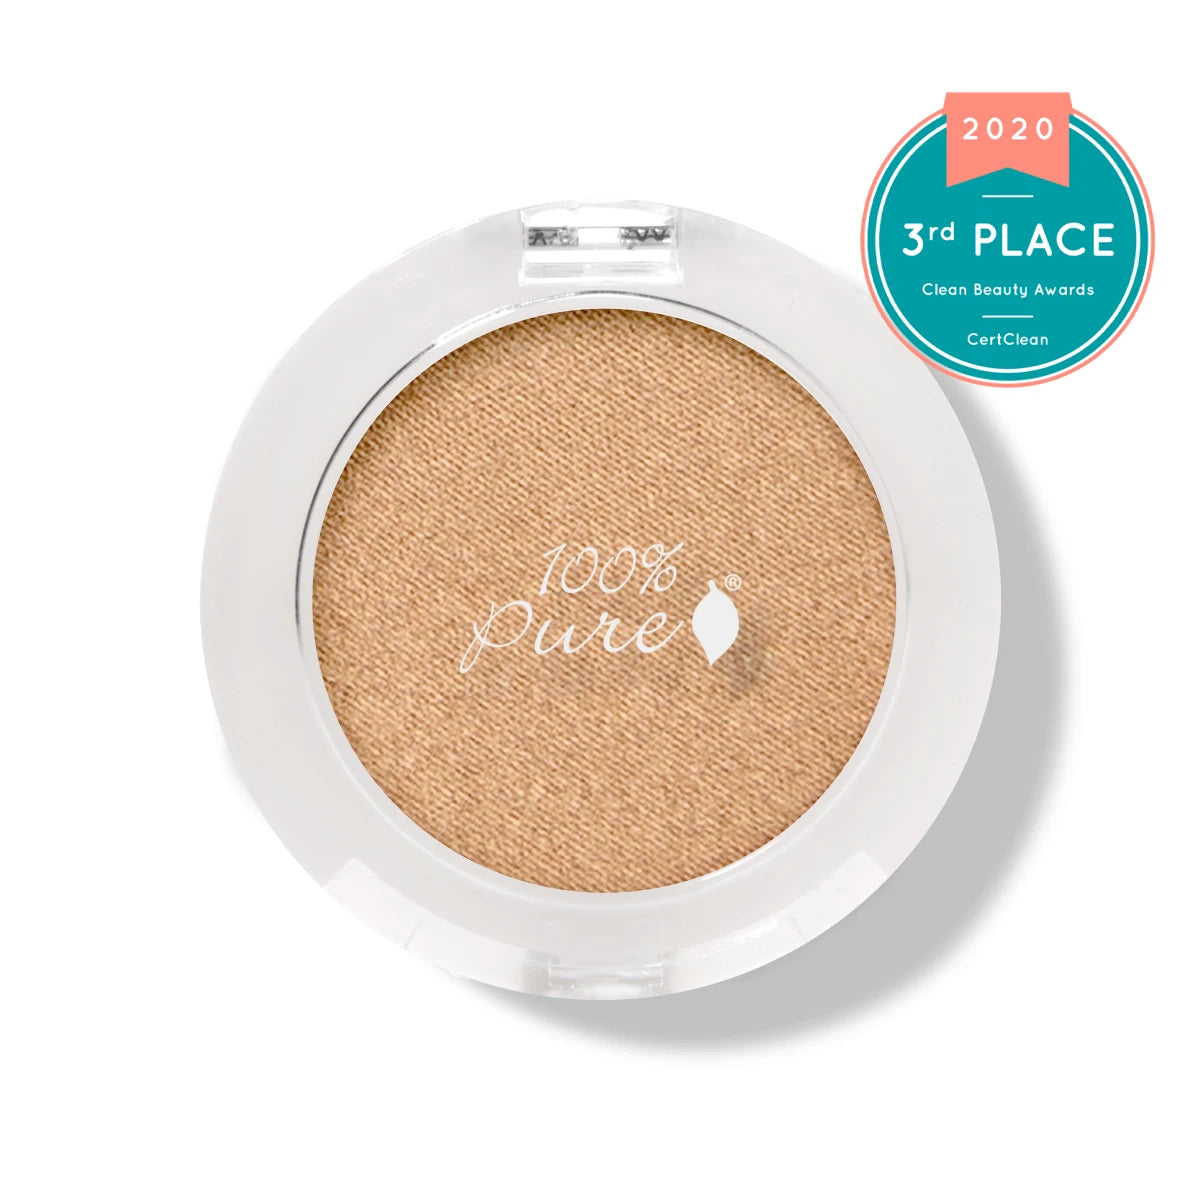 100%_pue_the_skincare_district_uae_middle_east_Eye_Shadow_Gilded_Primary